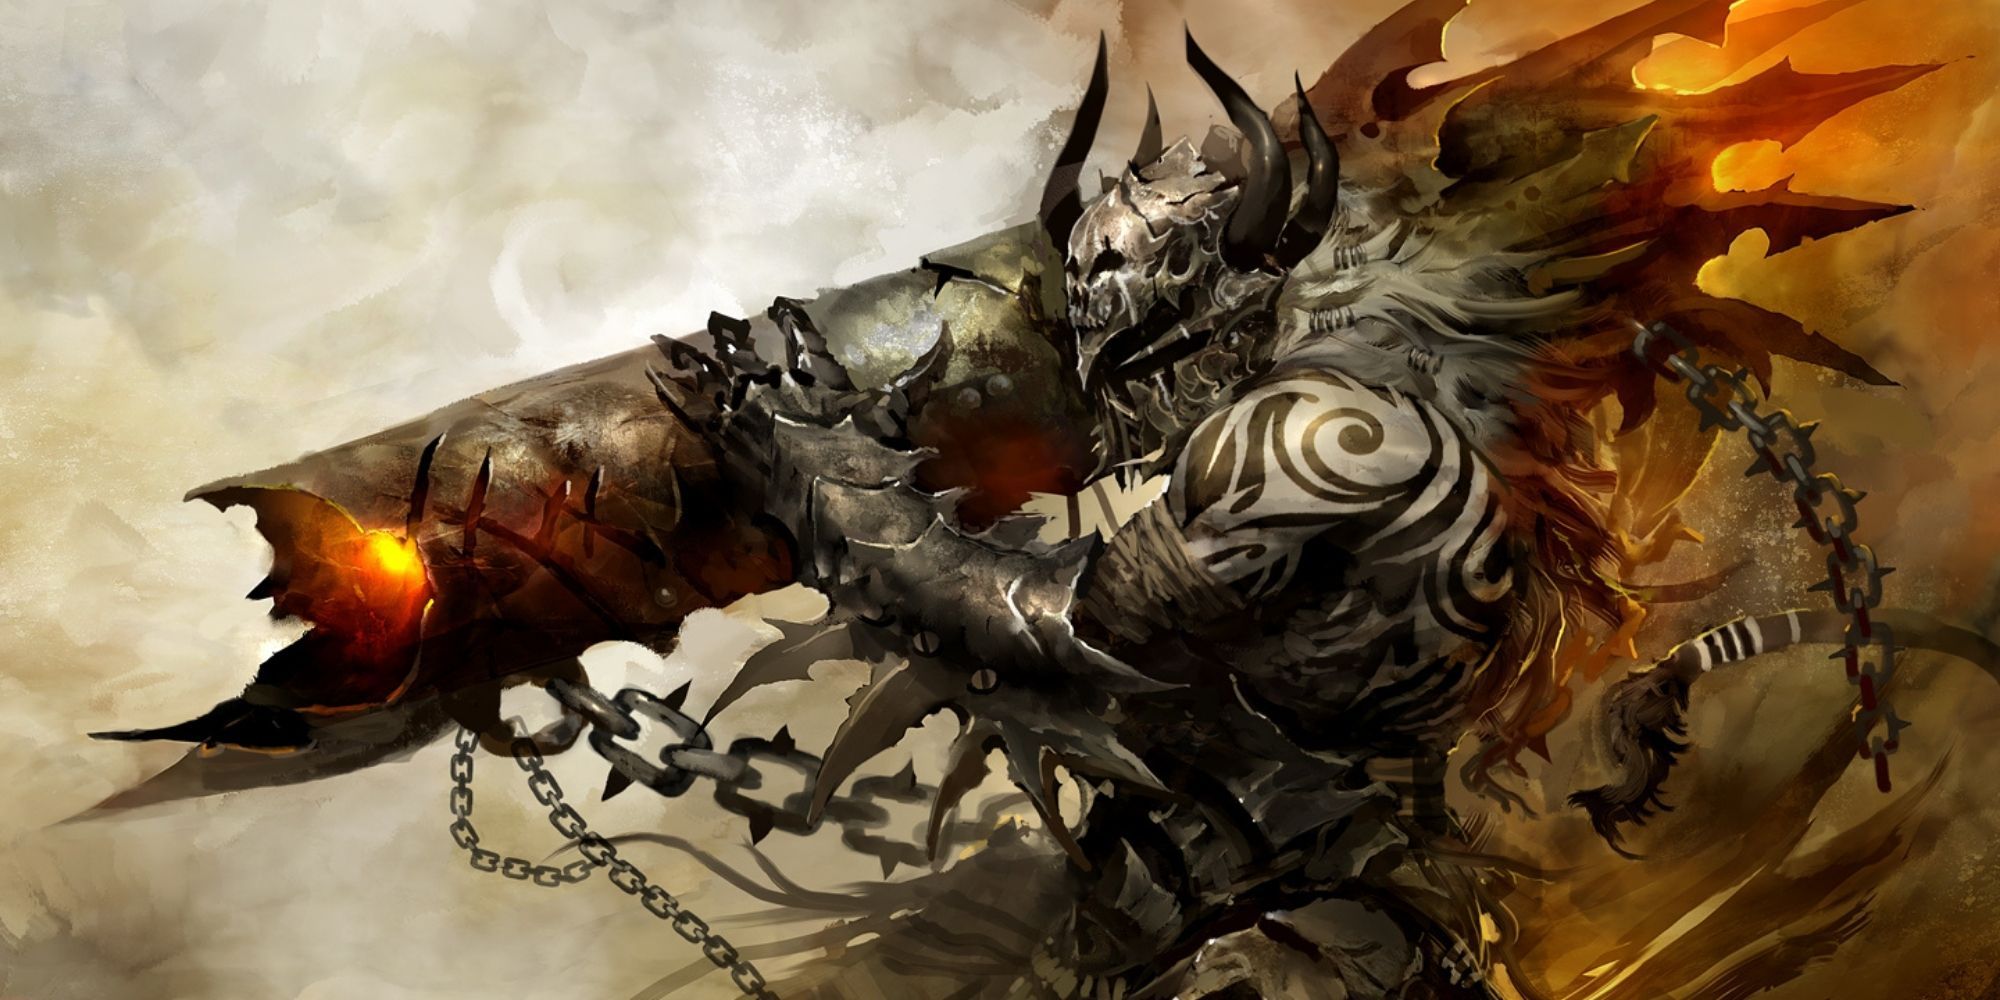 Guild Wars 2 - Official Art Of Charr Cannoneer